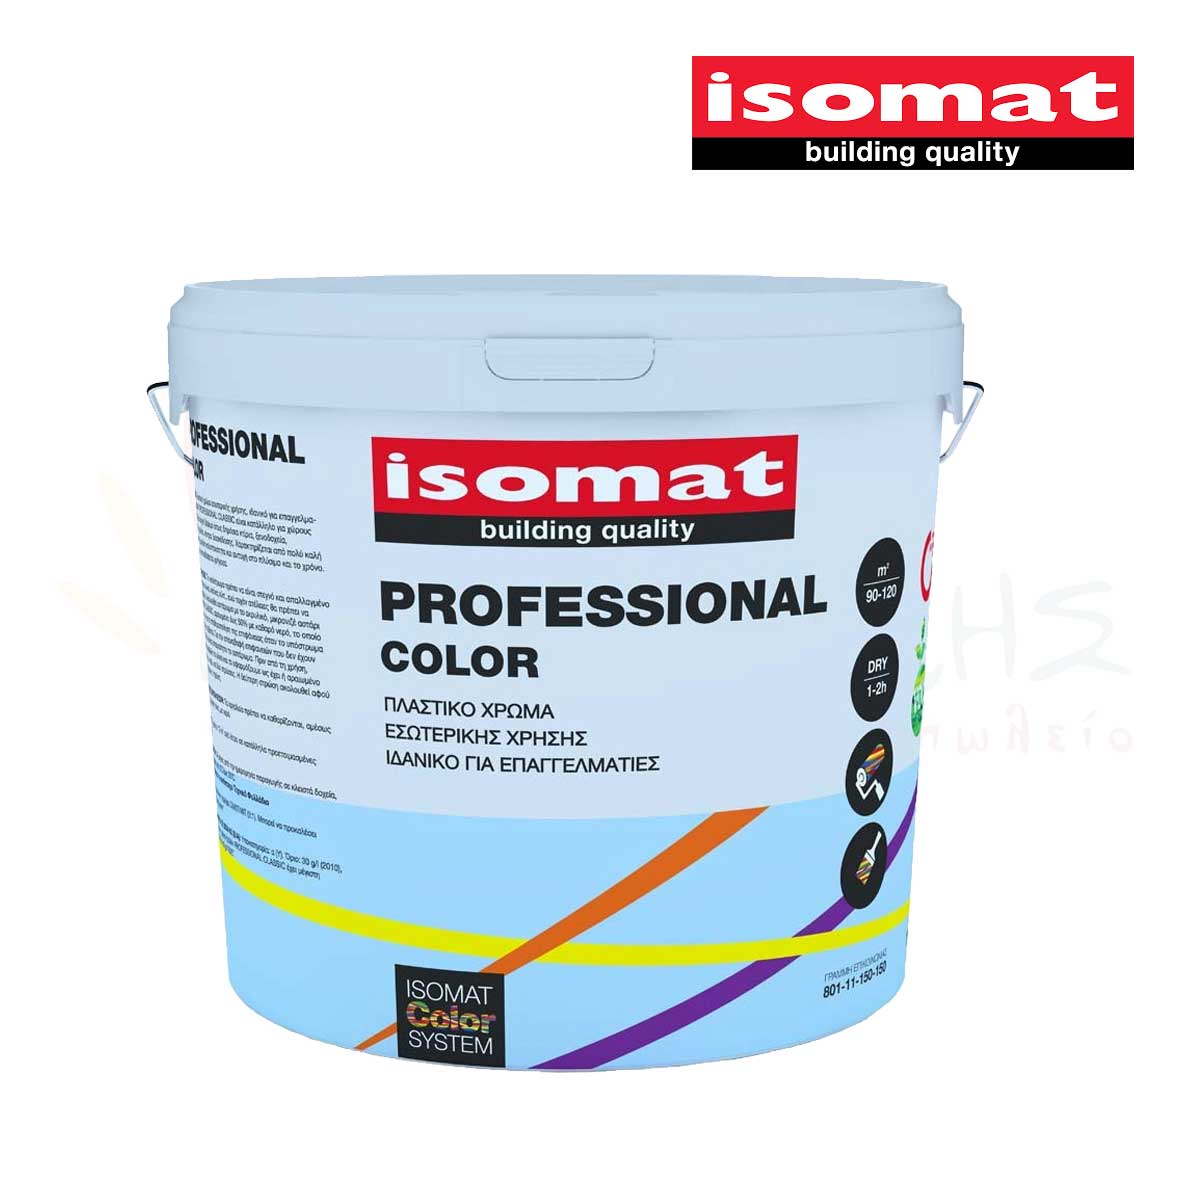 Professional Color - ISOMAT